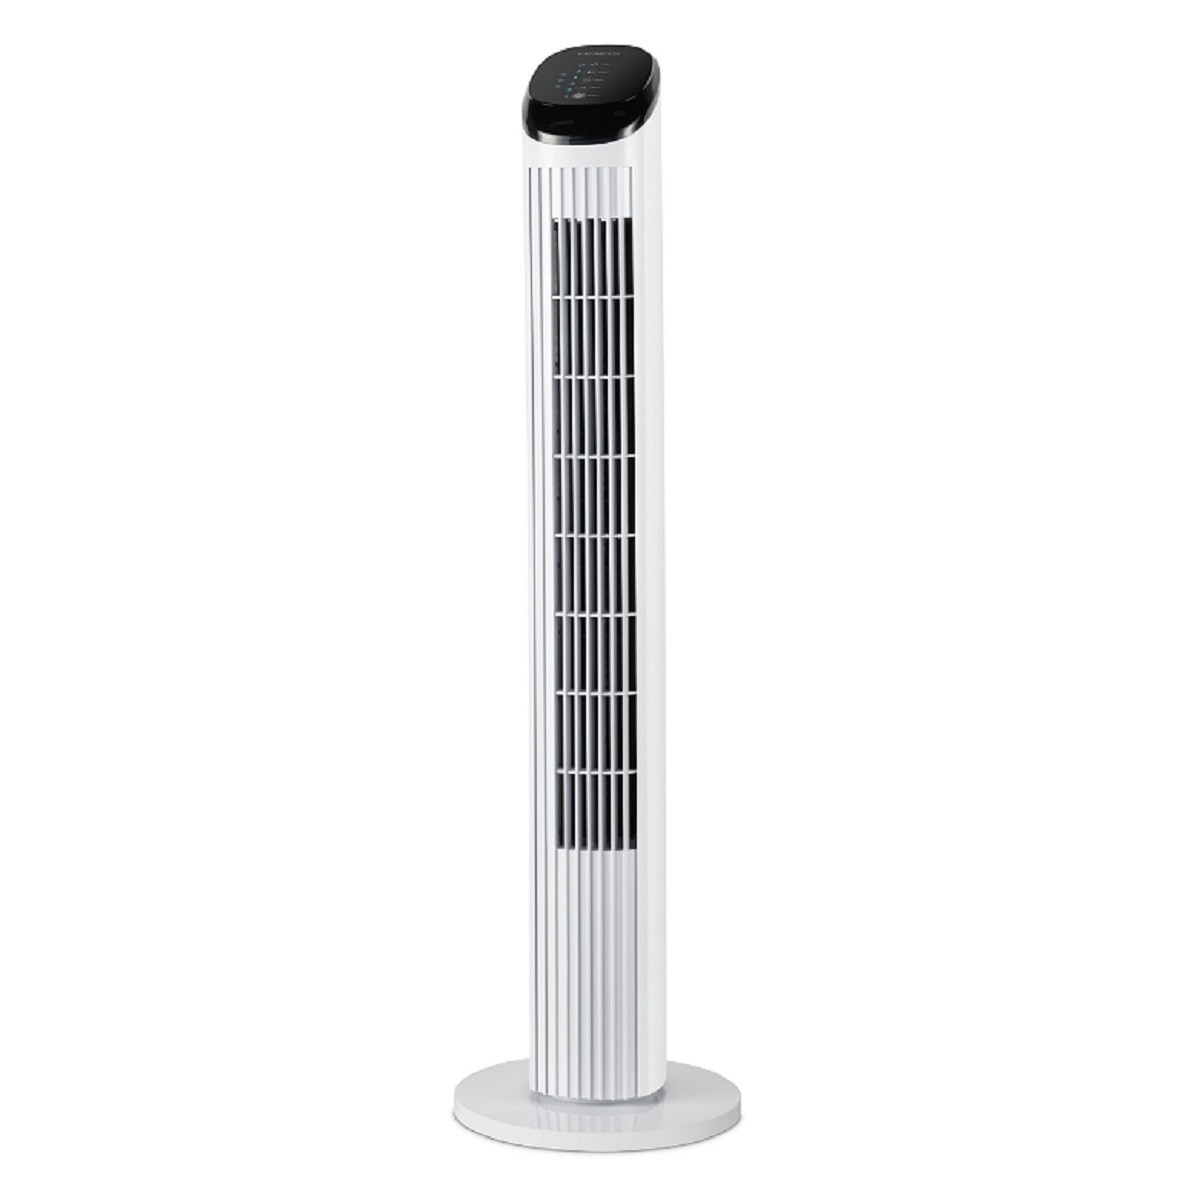 Kambrook 87cm Tower Fan Touch Display White Ktf840wht pertaining to proportions 1200 X 1200